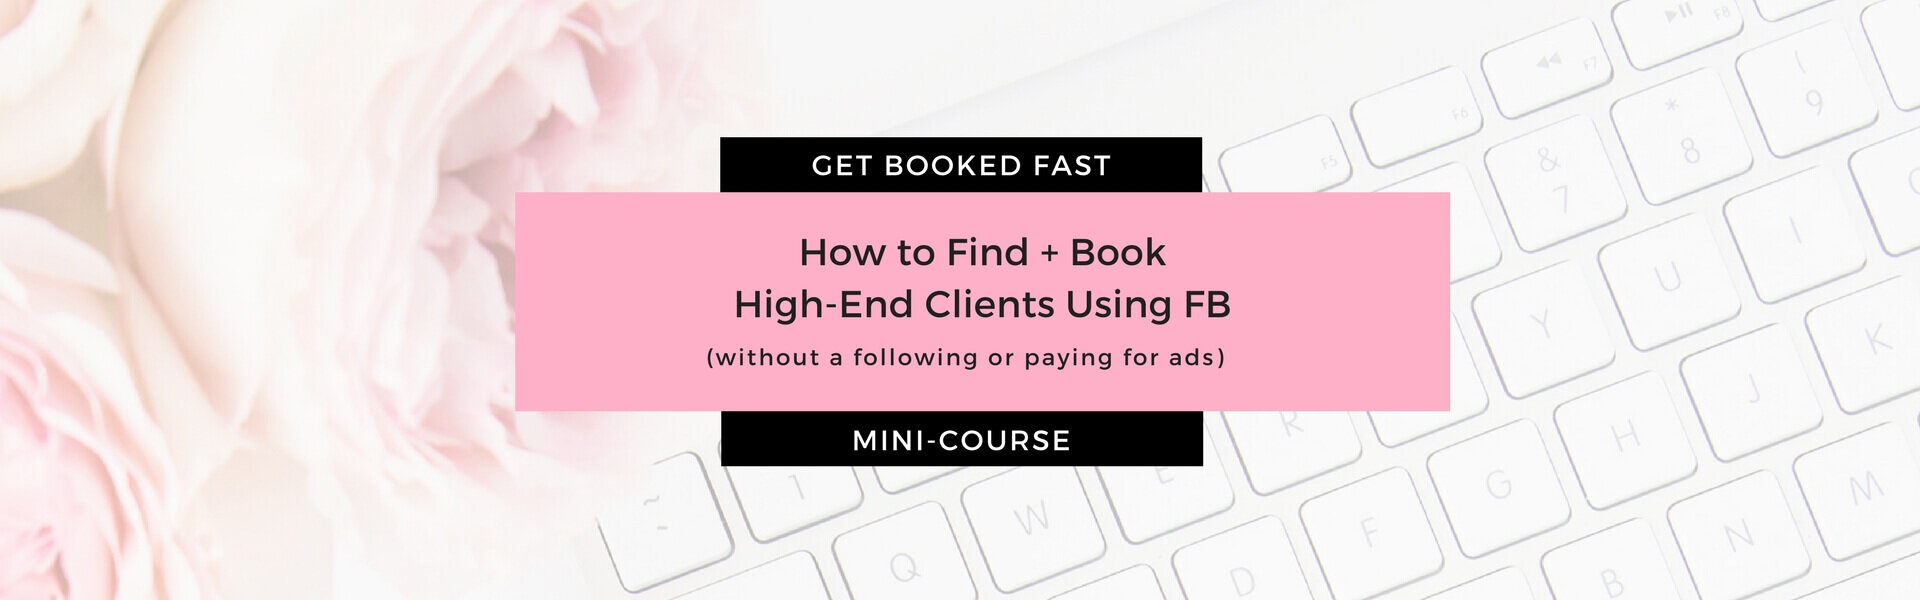 How-to-Find-   Book-High-End Clients-on-FB- christine-parma.jpg